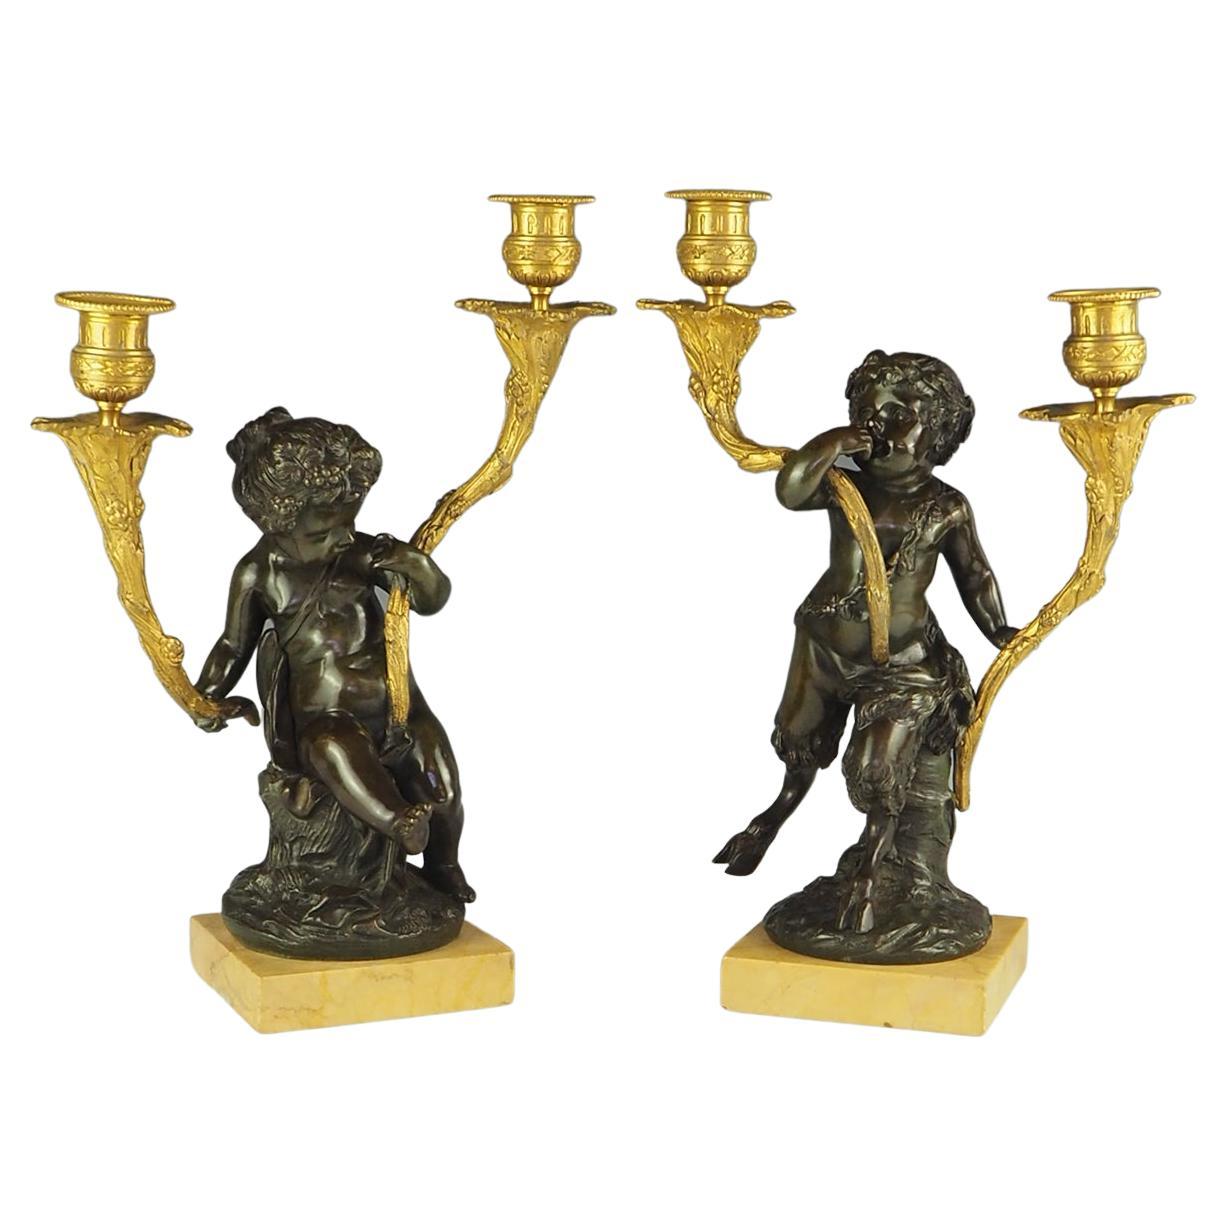 Pair of French Solid Bronze and Ormolu Candelabras, circa 1820 For Sale